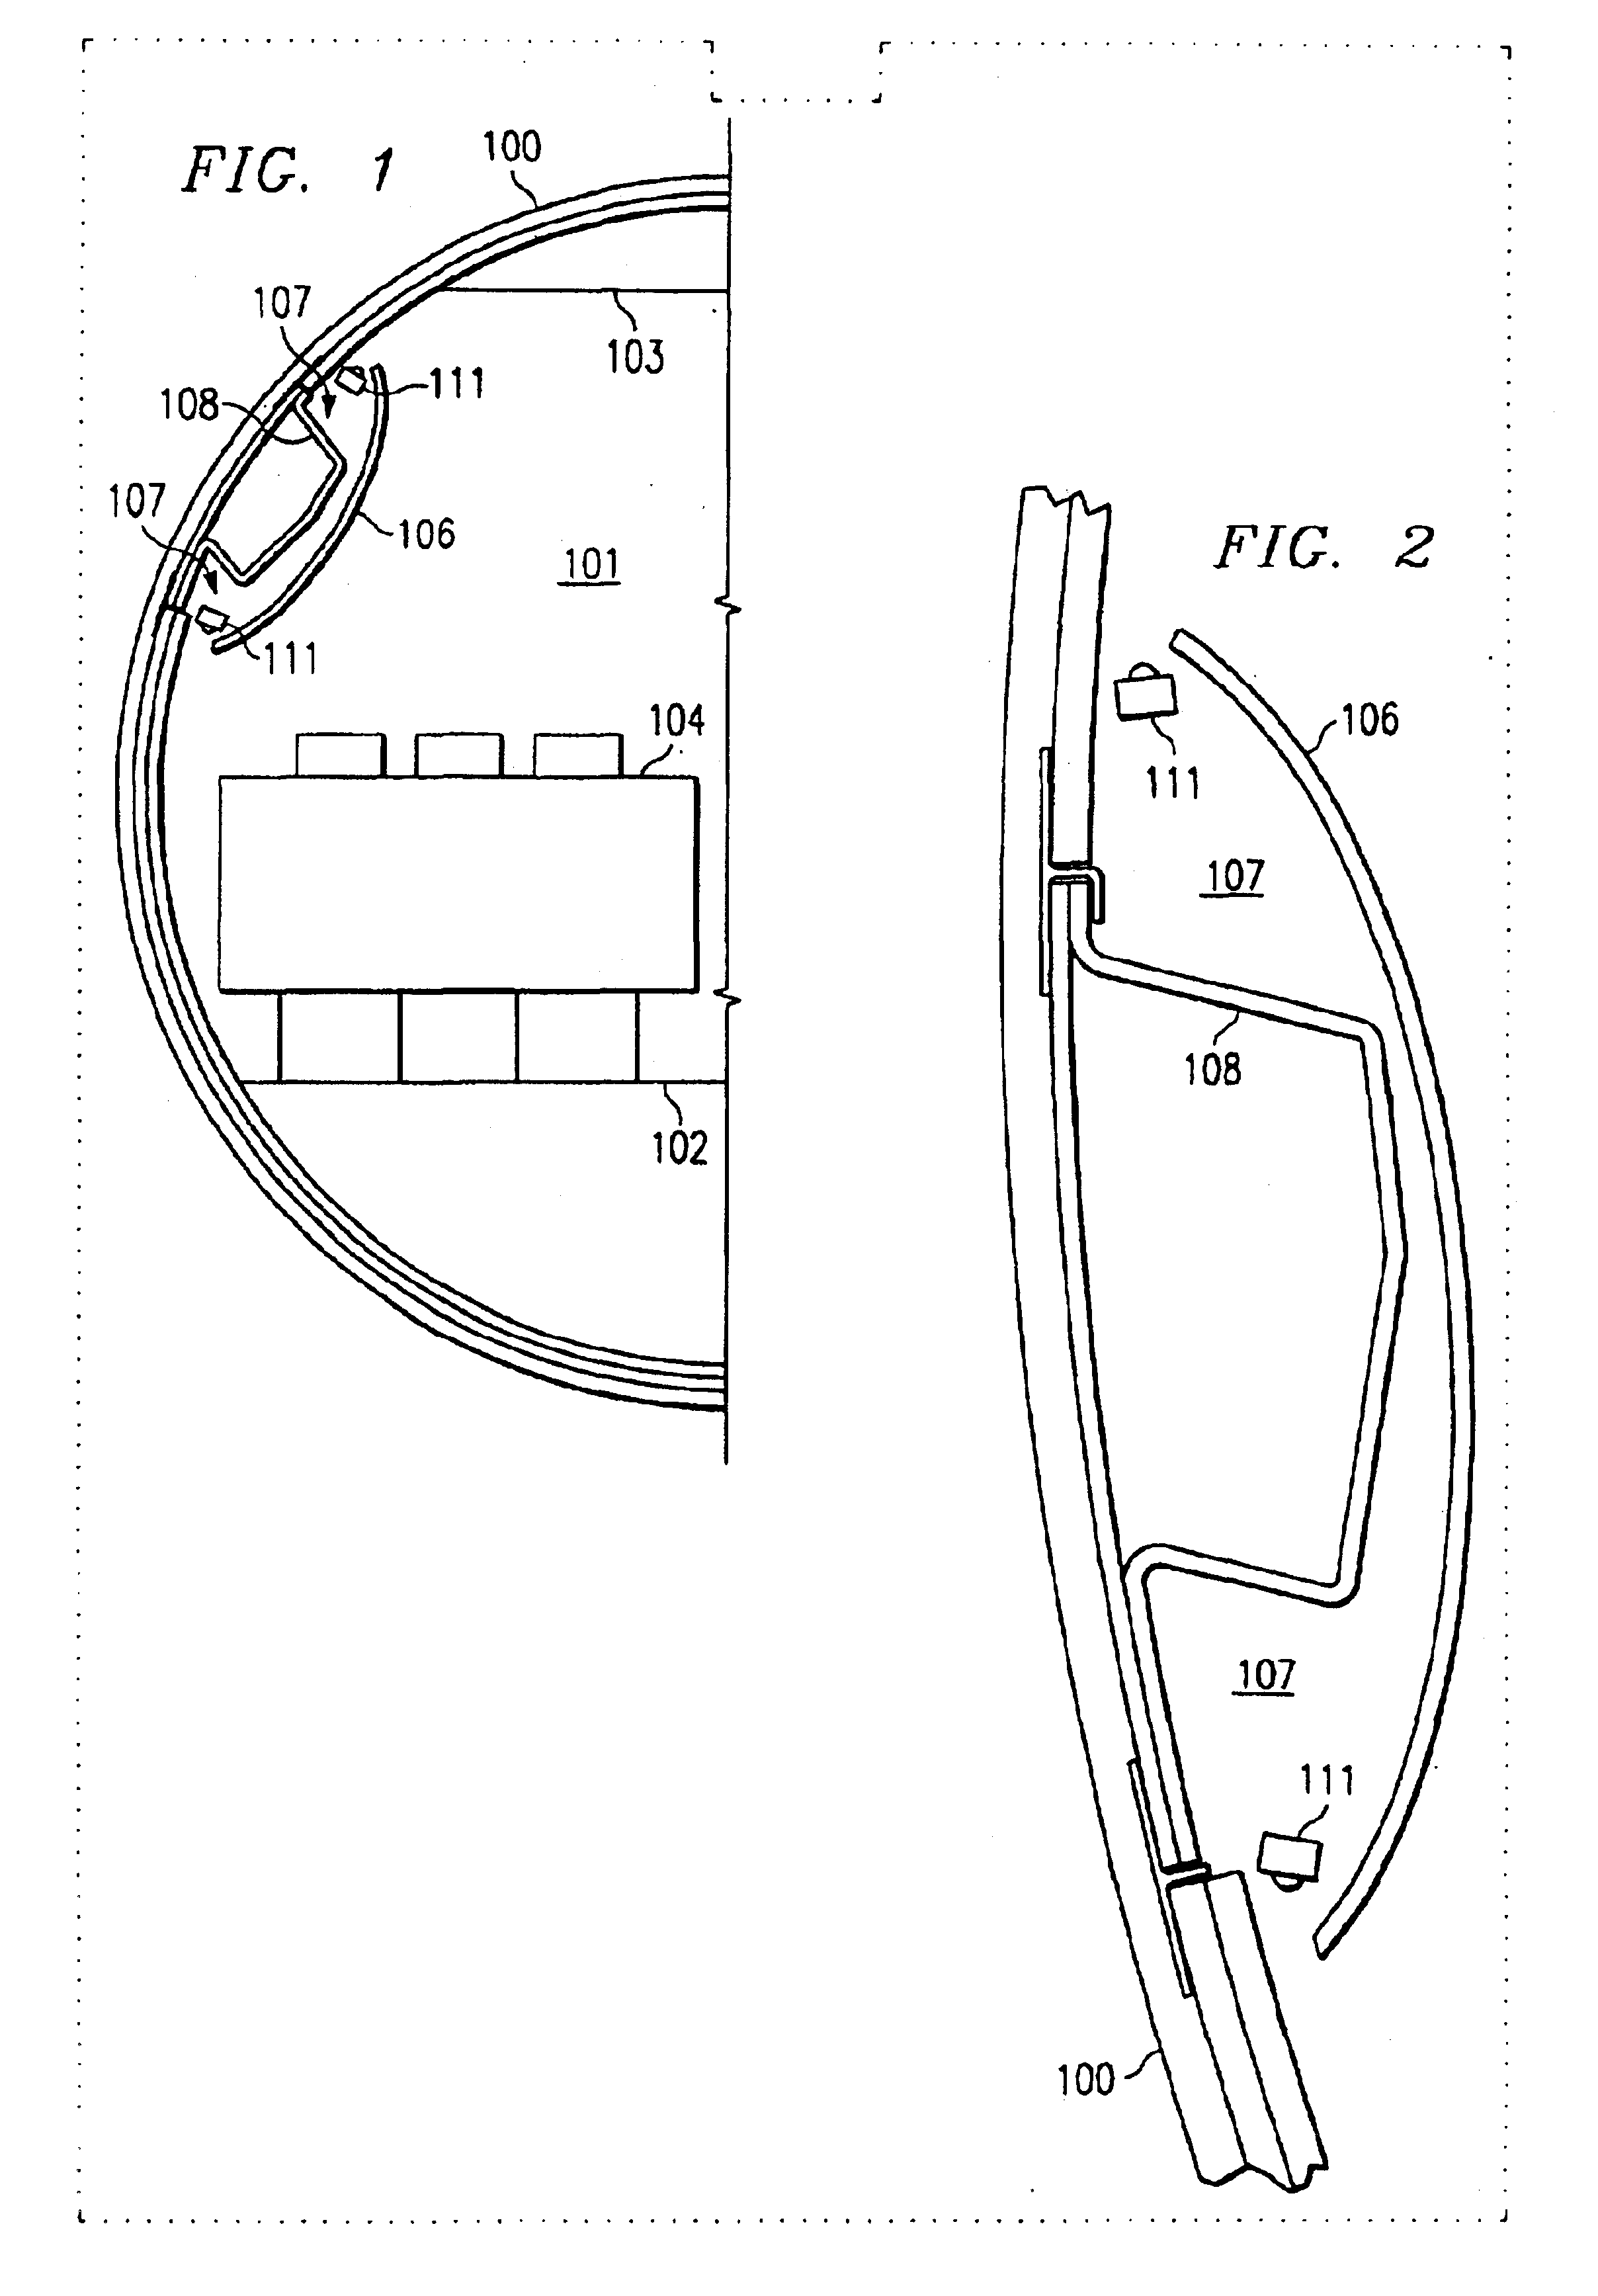 LED lighting device and system